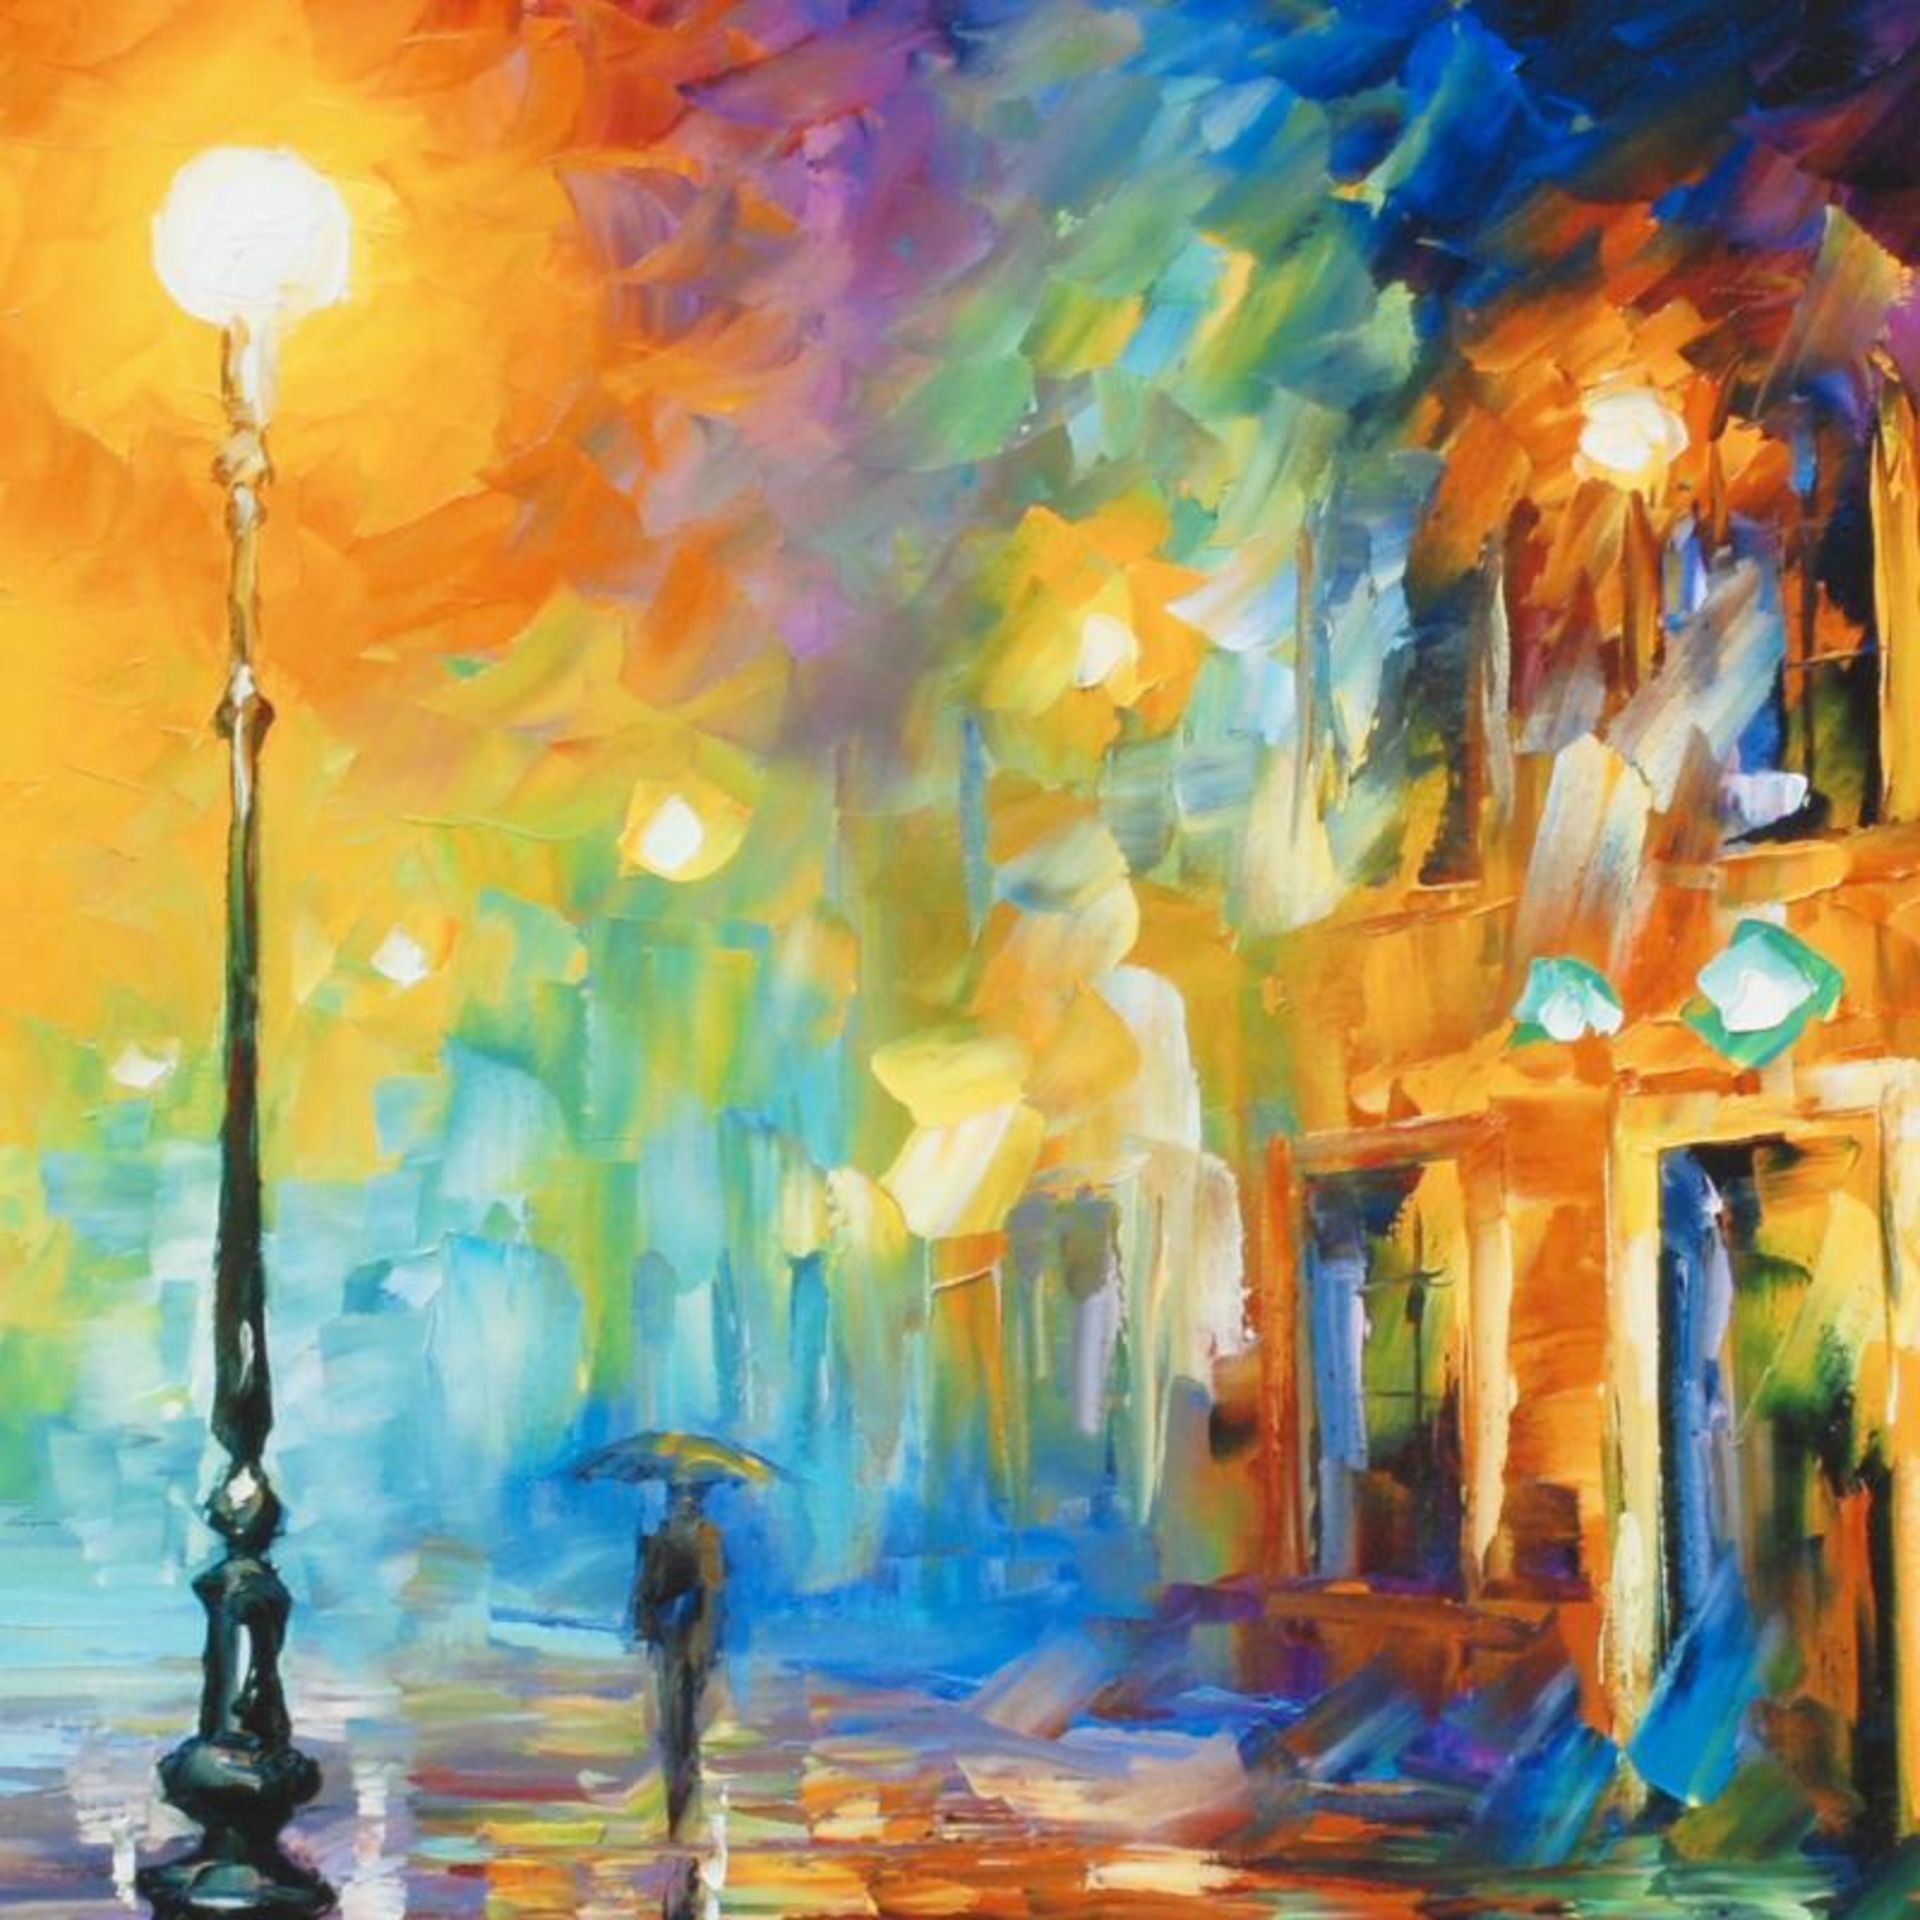 Leonid Afremov (1955-2019) "Misty City" Limited Edition Giclee on Canvas, Number - Image 2 of 3